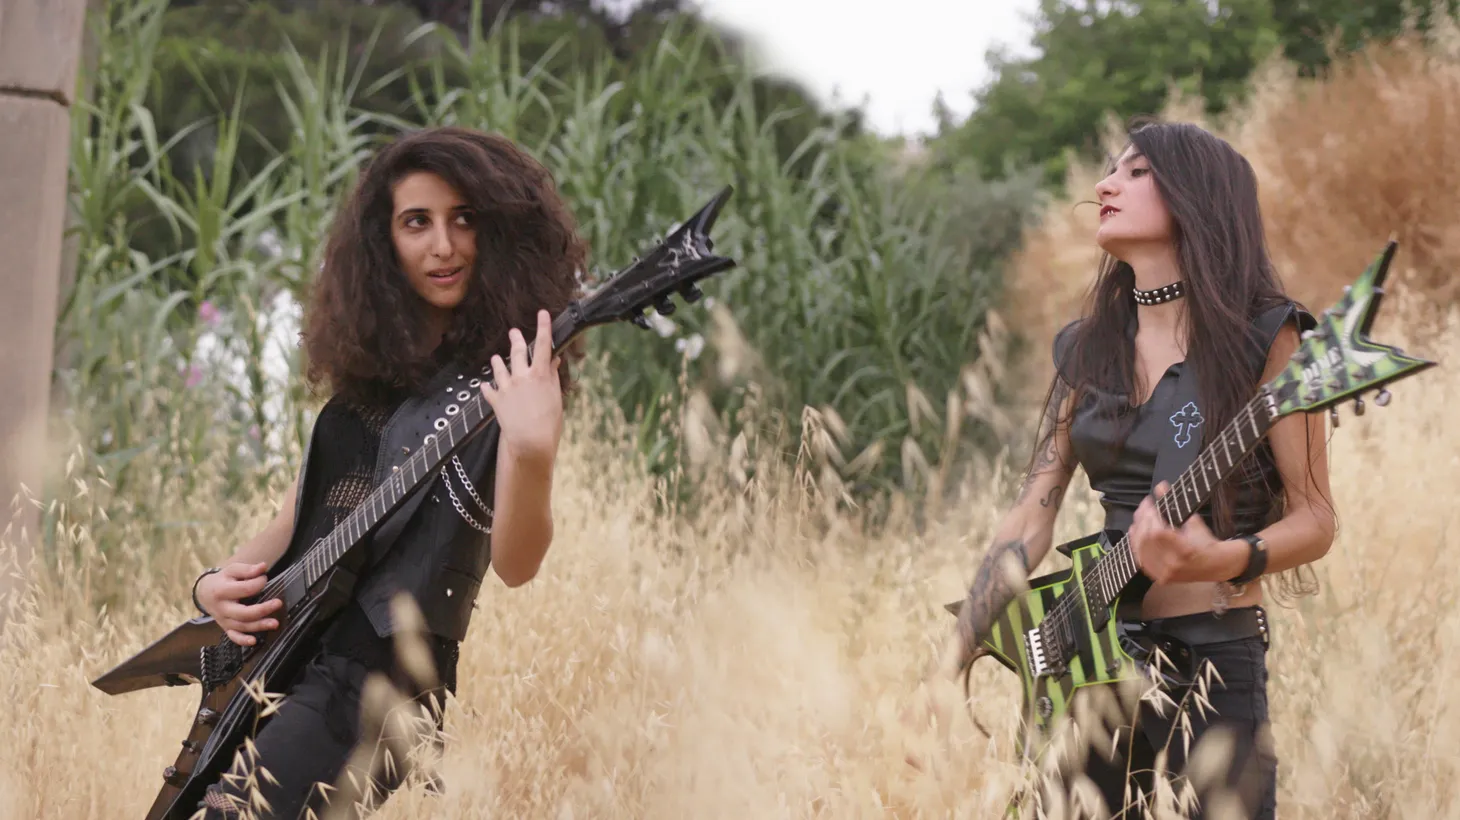 Lilas Mayassi, left, and Shery Bechara are founding members of all-female thrash metal band Slave to Sirens. Hailing from Lebanon, the band is the subject of Rita Baghdadi’s latest documentary “Sirens.” Mayassi and Bechara met at a protest and formed the band in 2015.